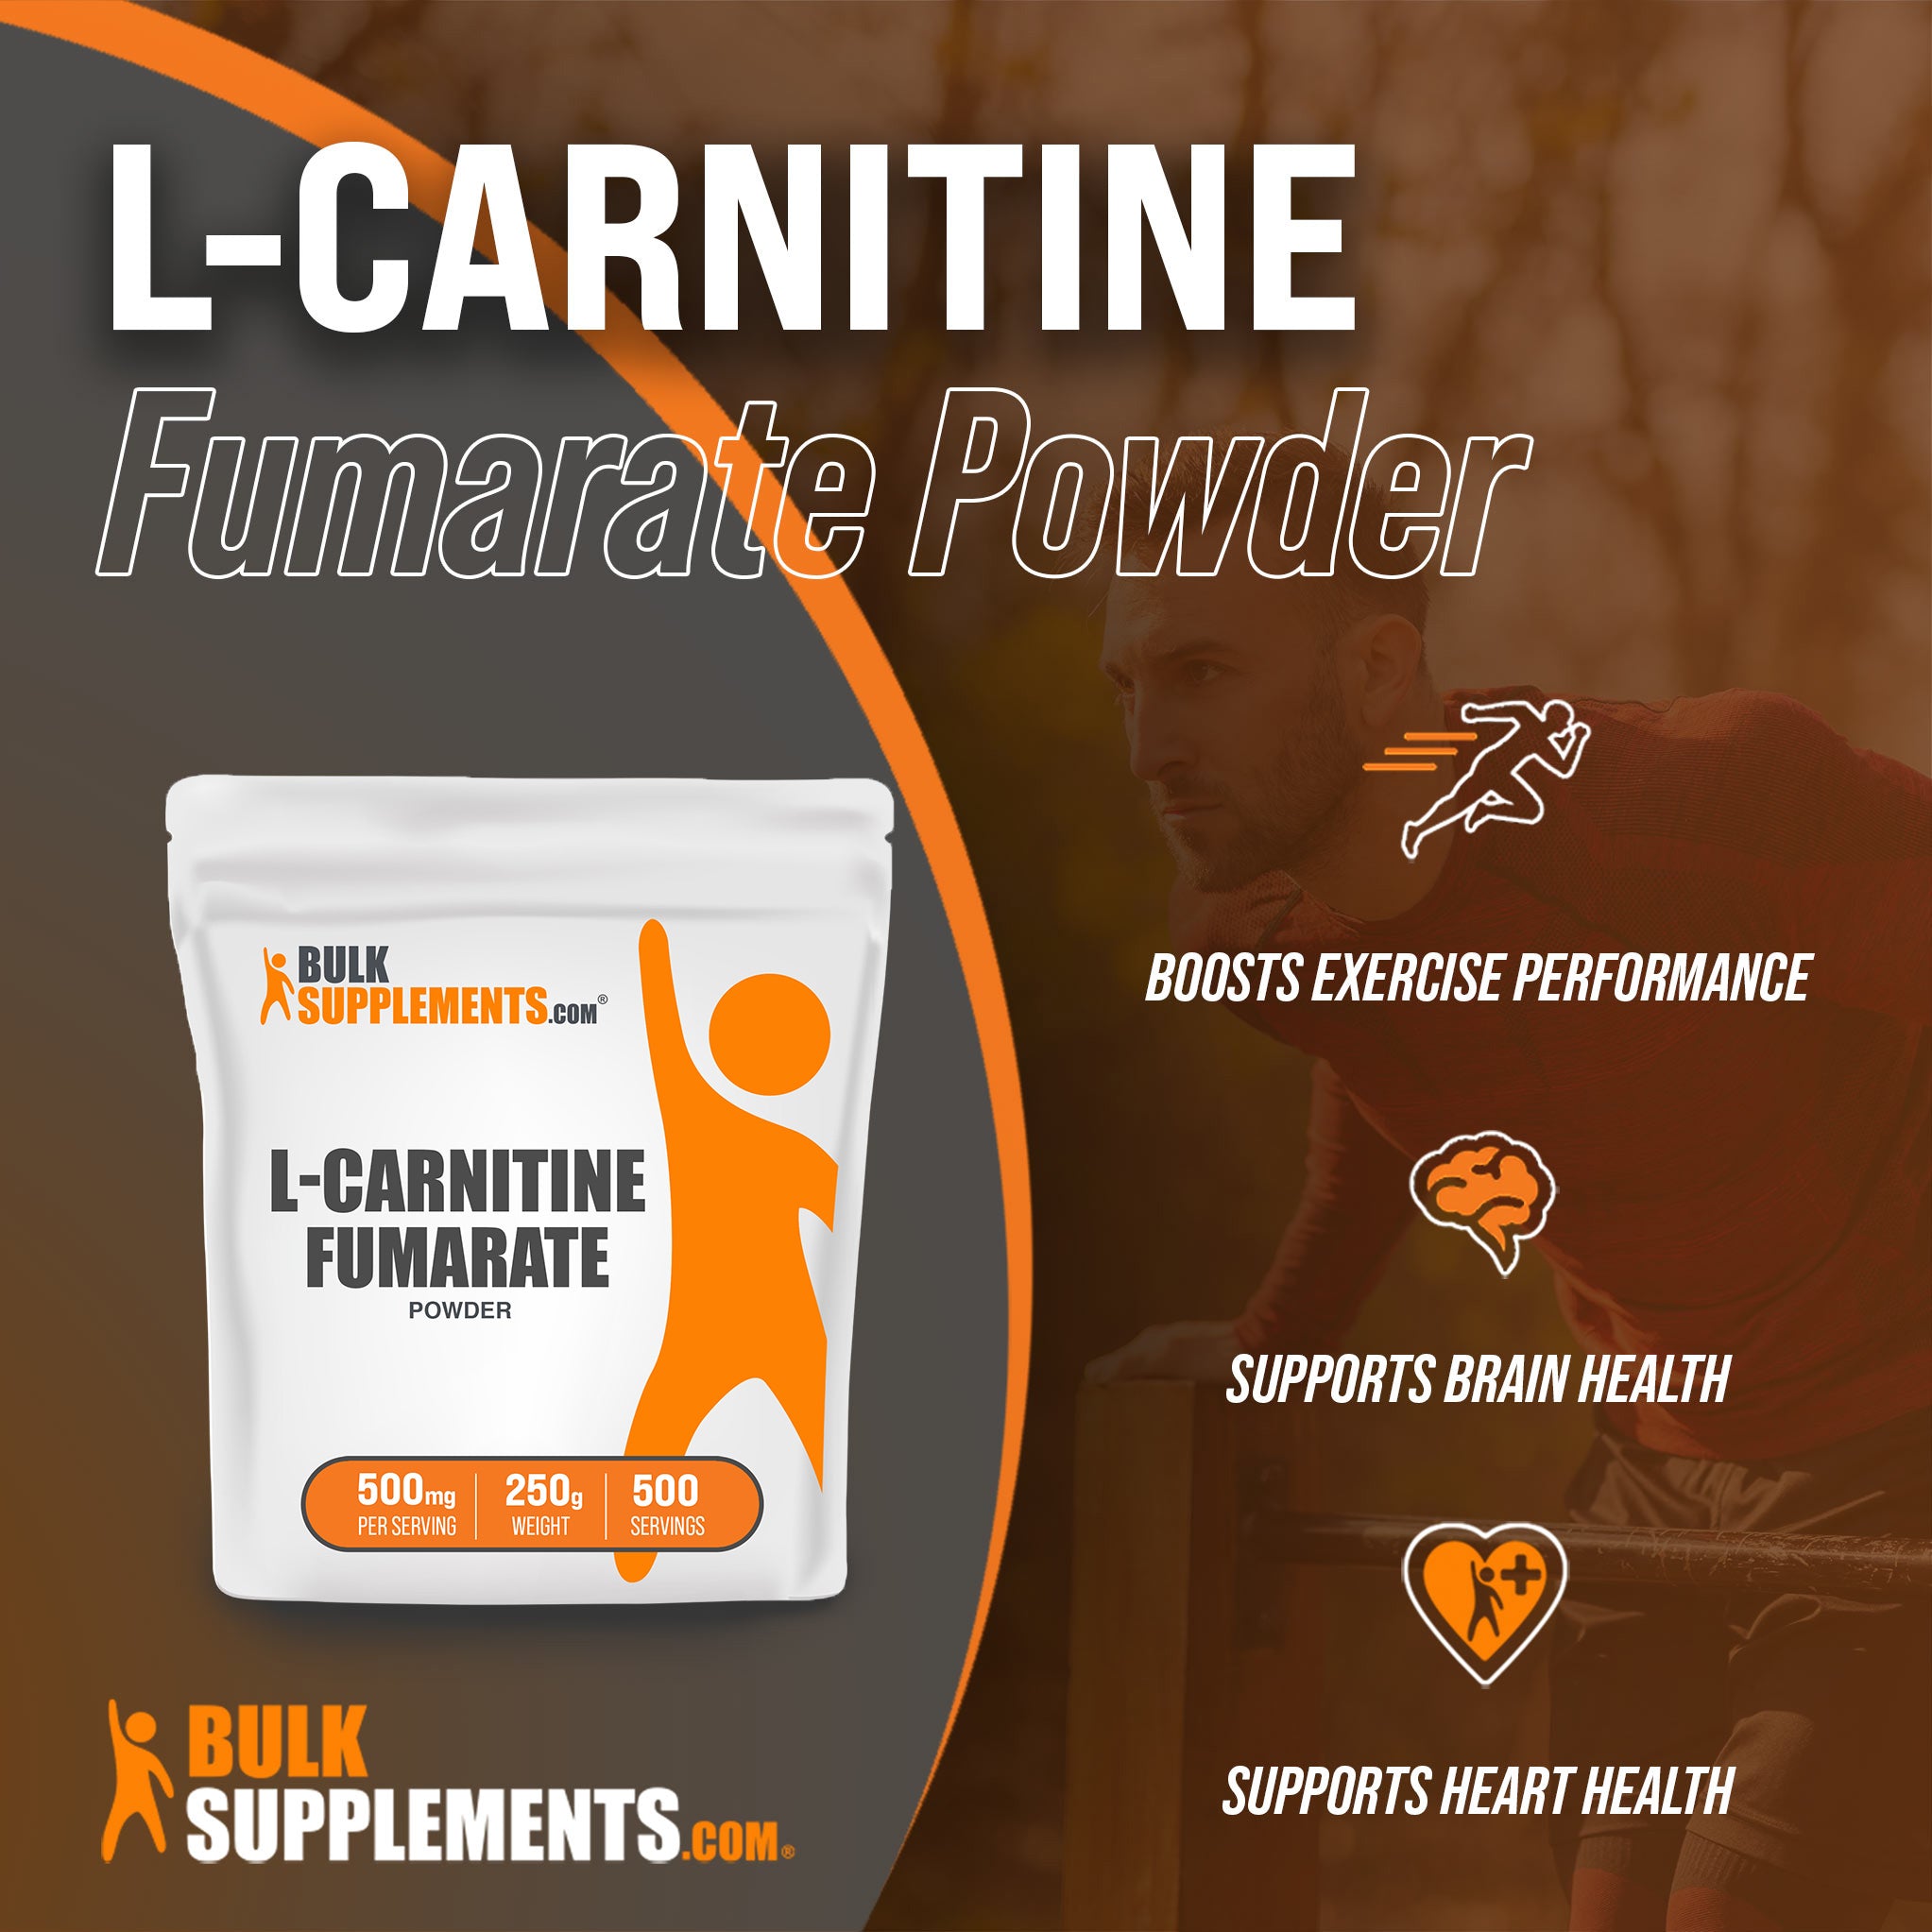 Benefits of L-Carnitine Fumarate: boosts exercise performance, supports brain health, supports heart health